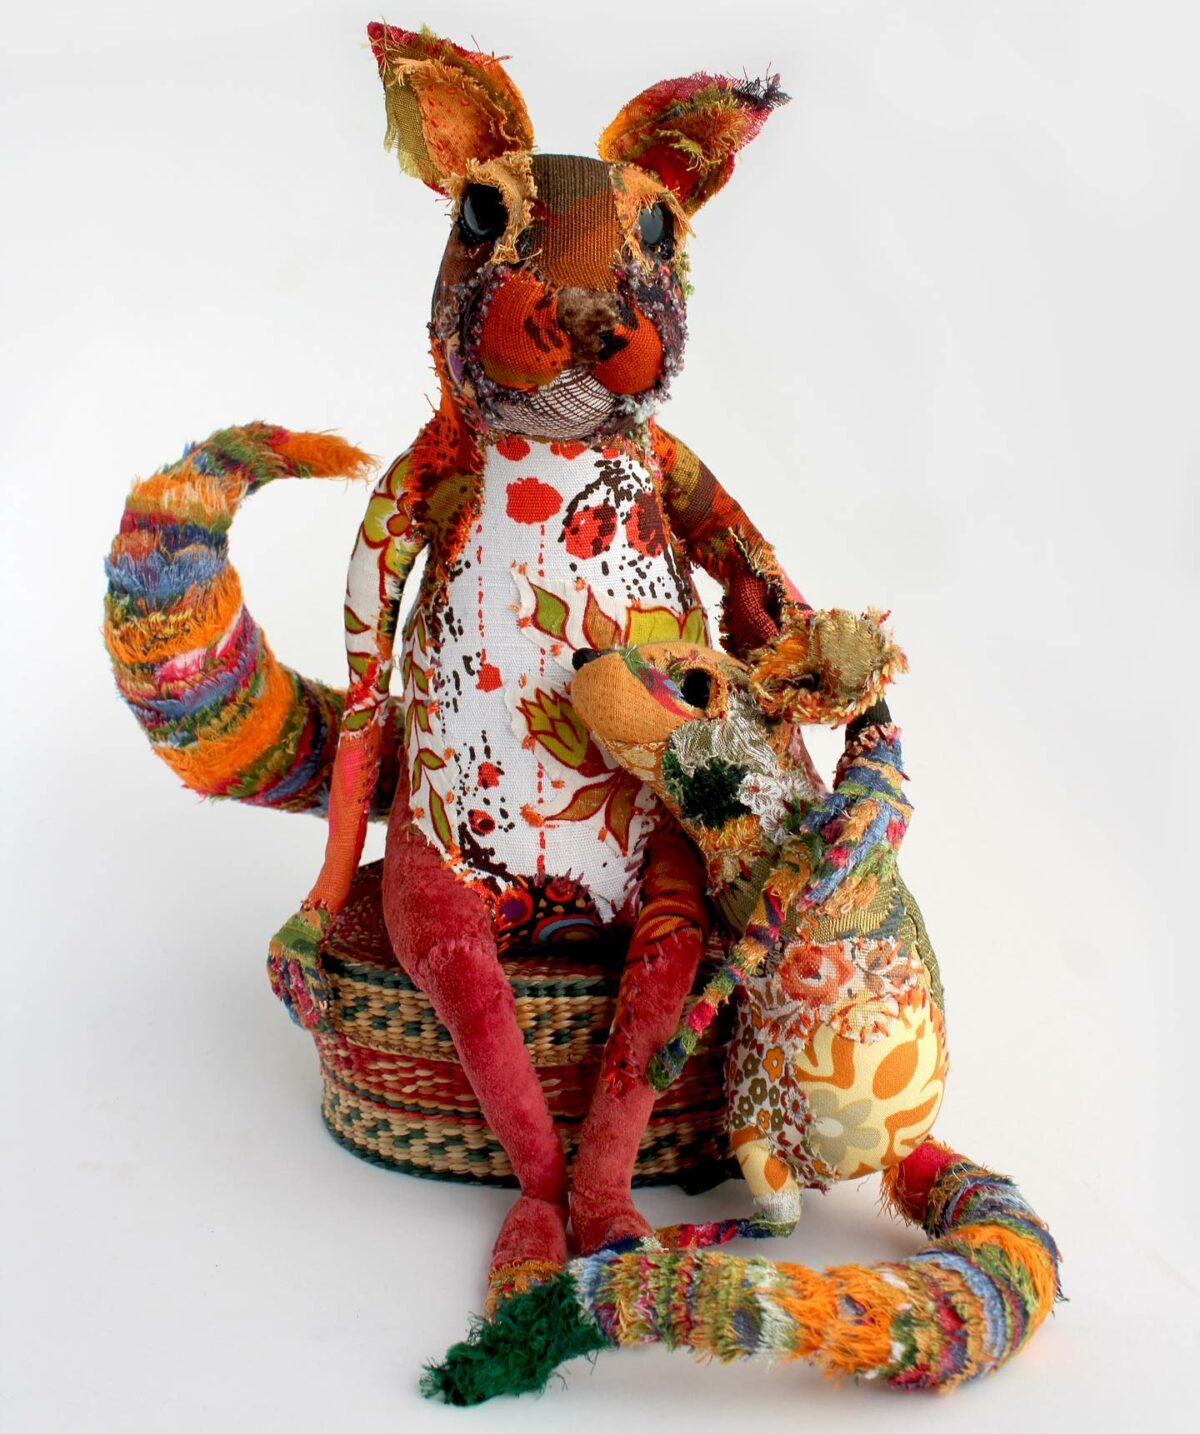 Pretty Scruffy Enchanting Animal Textile Sculptures By Bryony Rose Jennings 2